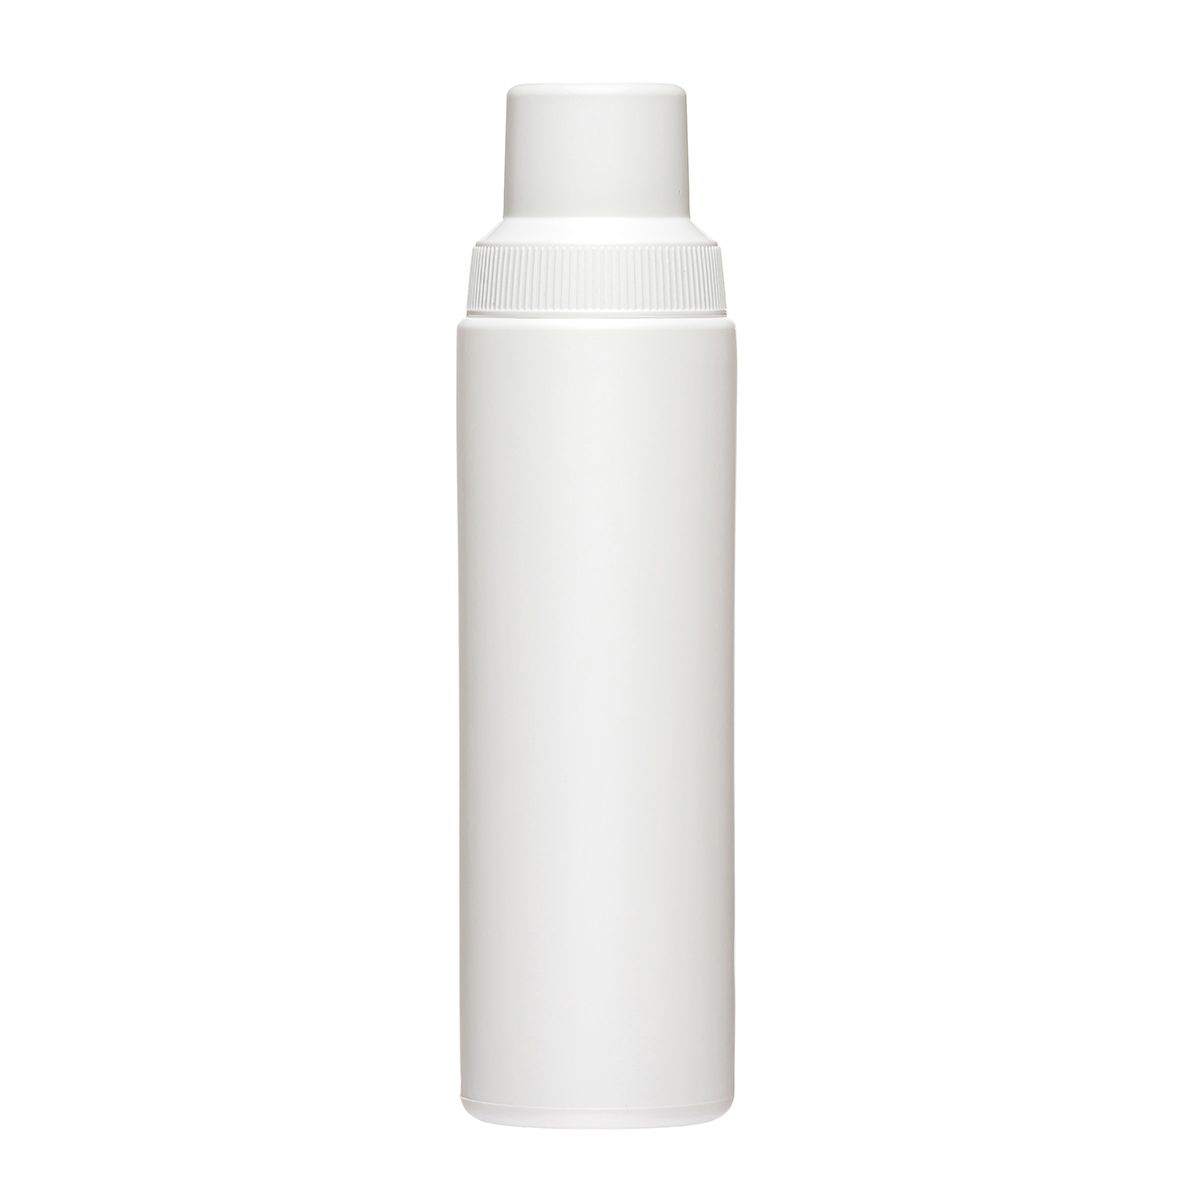 The 200 ml HDPE bottle Dufa 200 with measurin cap is perfect choice for any product in household chemicals.  This series of bottles is presented in different volumes: 200 ml and 750 ml.